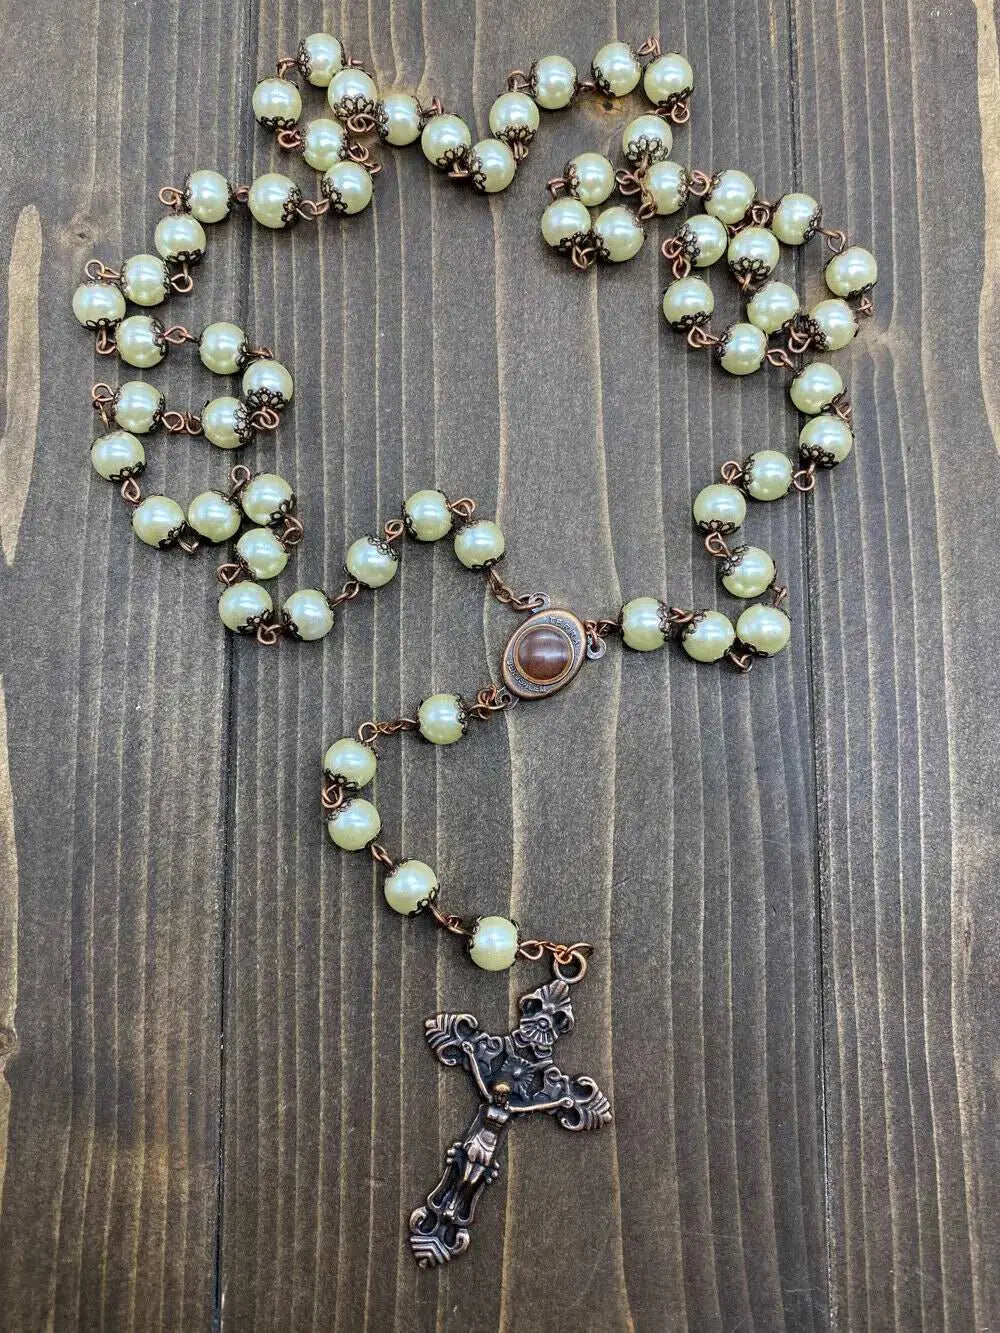 Cream Pearl Beads Rosary Necklace Holy Soil Medal Vintage Design Rosario